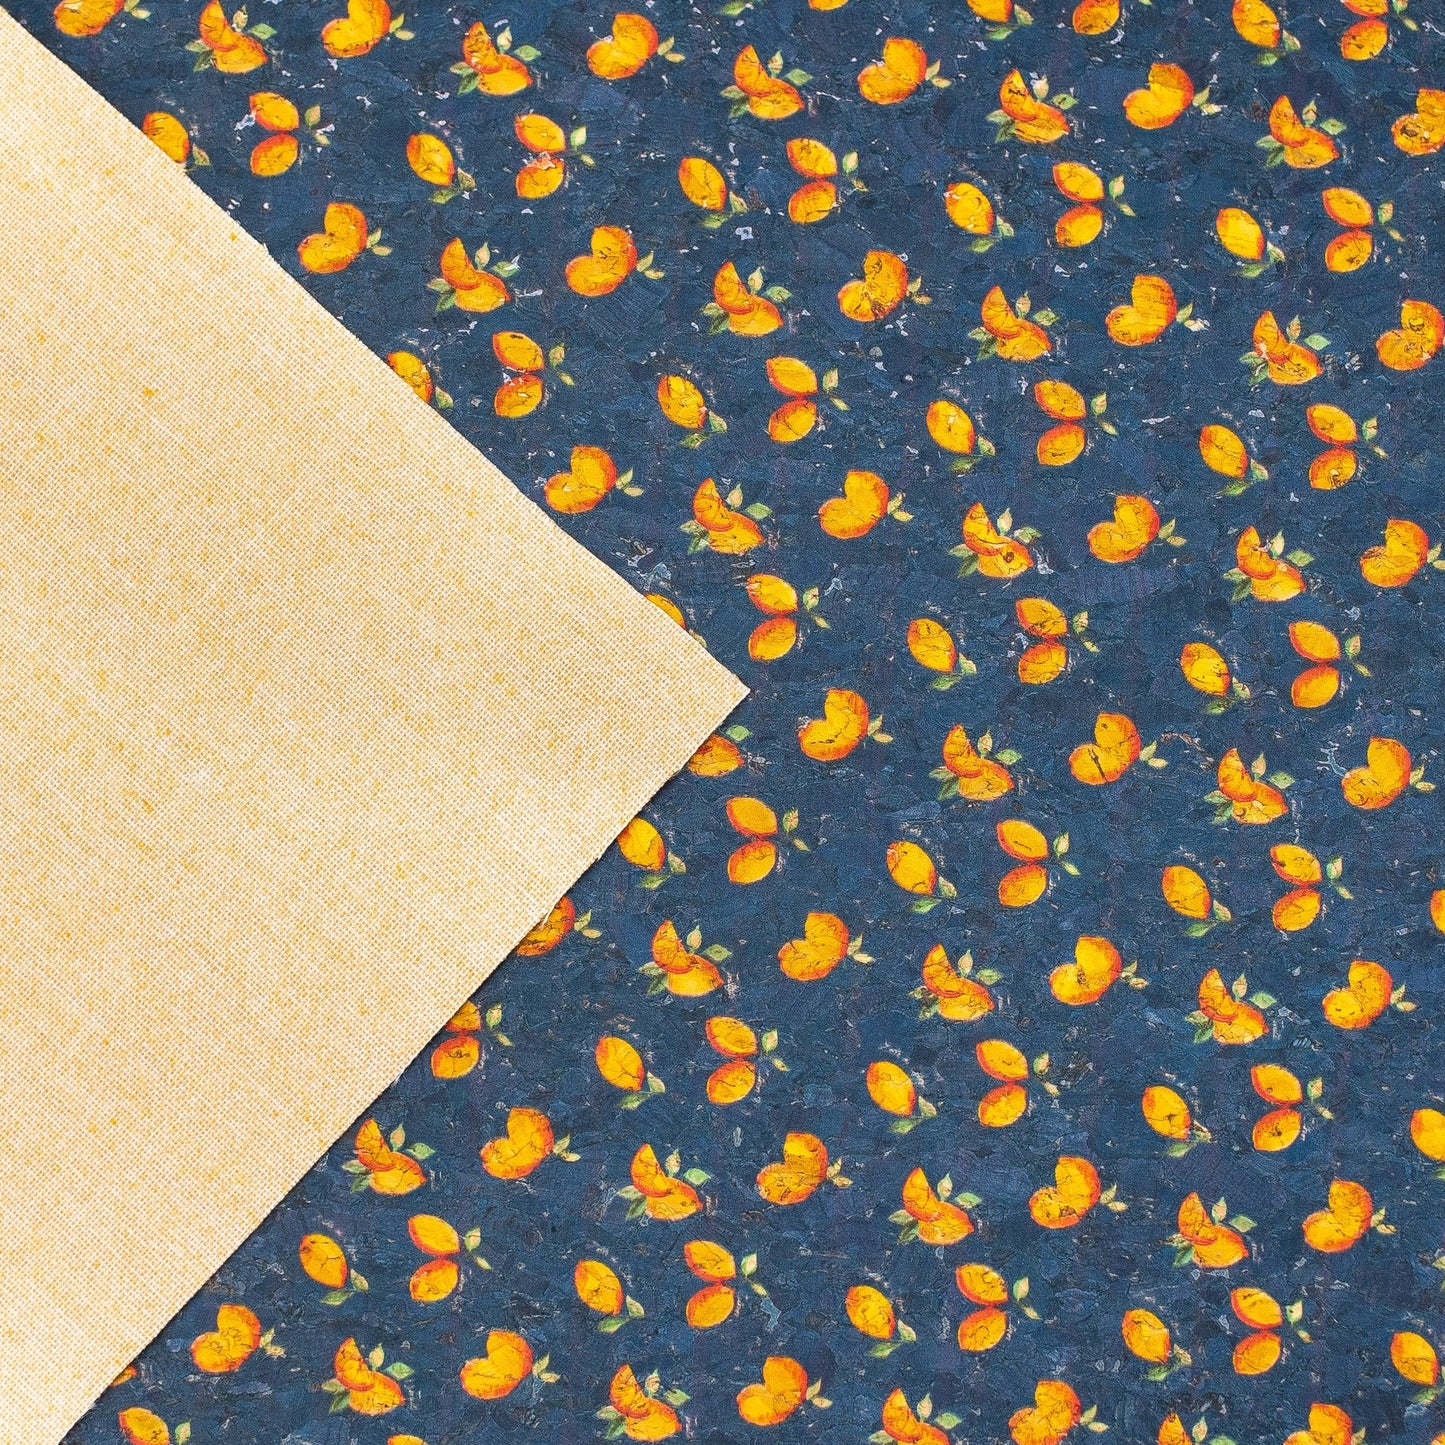 Fruity Lime & Blue Printed Vegan Cork Fabric | THE CORK COLLECTION